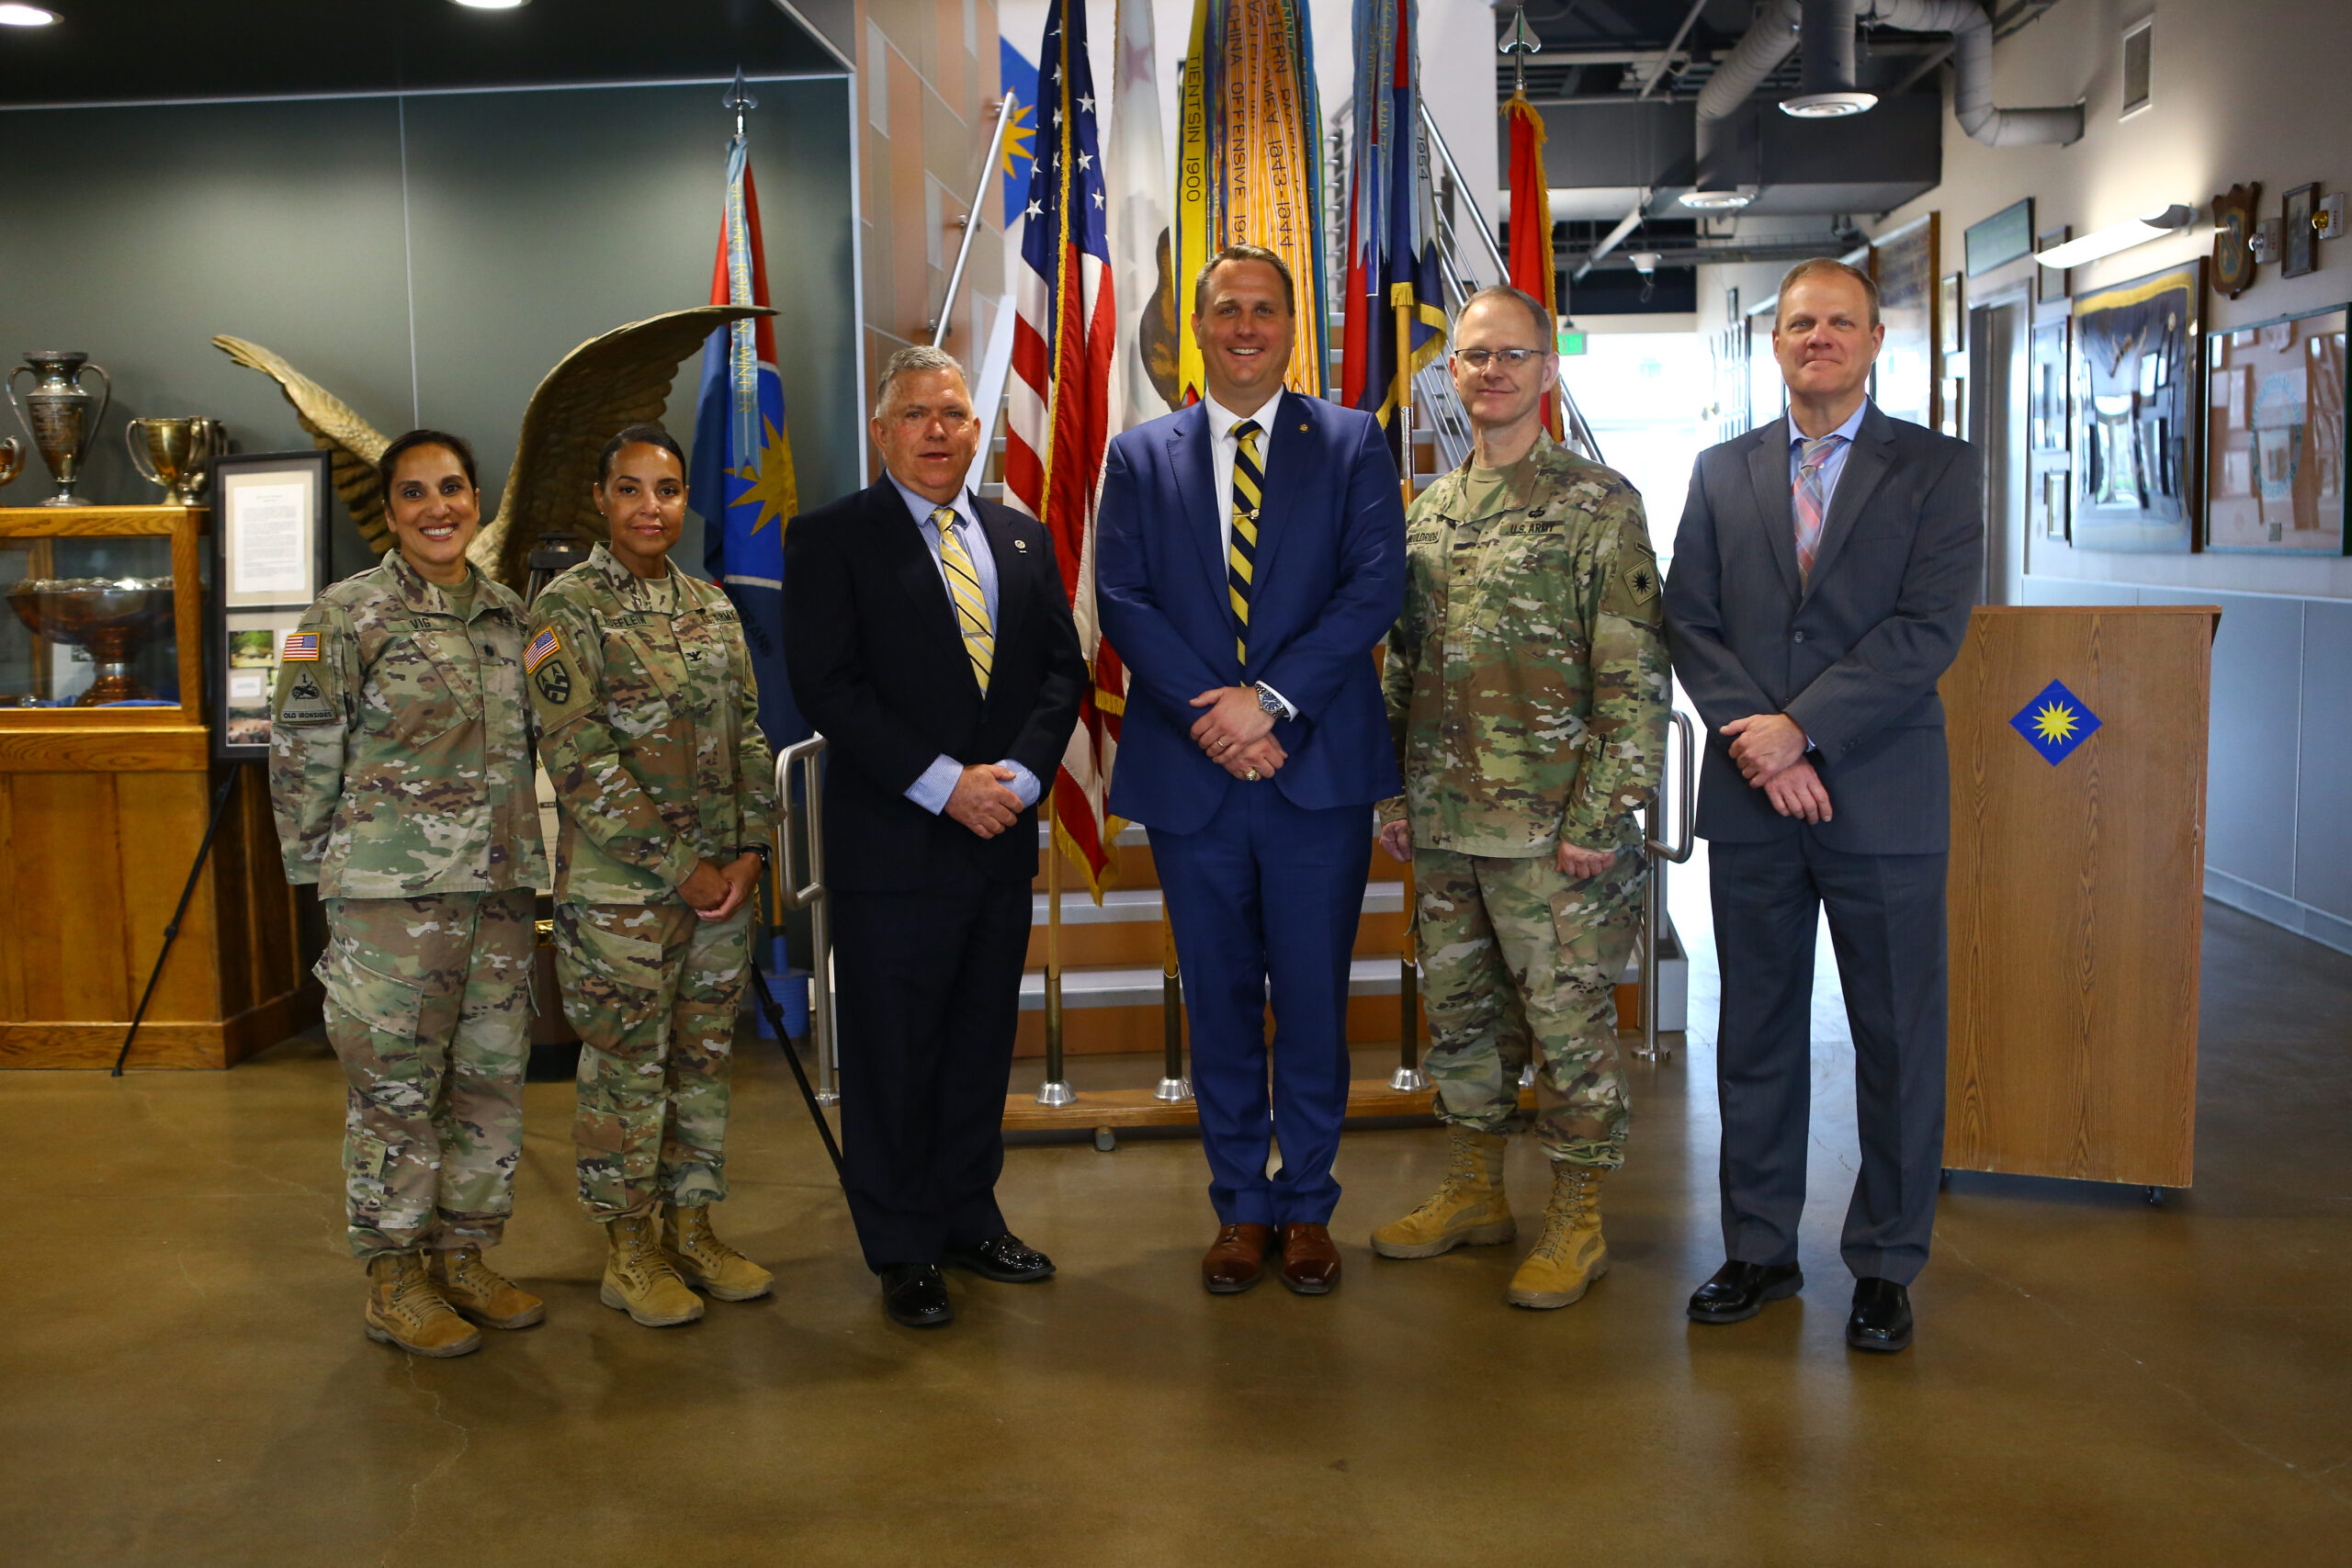 From left: U.S. Army Lt. Col. Manju Vig, garrison commander of Joint Forces Training Base, Los Alamitos; Col. Robin Hoeflein, chief of staff of the 40th Infantry Division, California Army National Guard; John Arbogast, California state director for the Selective Service System, Joel Spangenberg, Selective Service System acting director, Brig. Gen. Robert Wooldridge, 40th Infantry Division deputy commanding general, and Steven Kett, Selective Service System Region III manager, stand for a group photo in the 40th Infantry Division headquarters following Arbogast’s swearing in ceremony